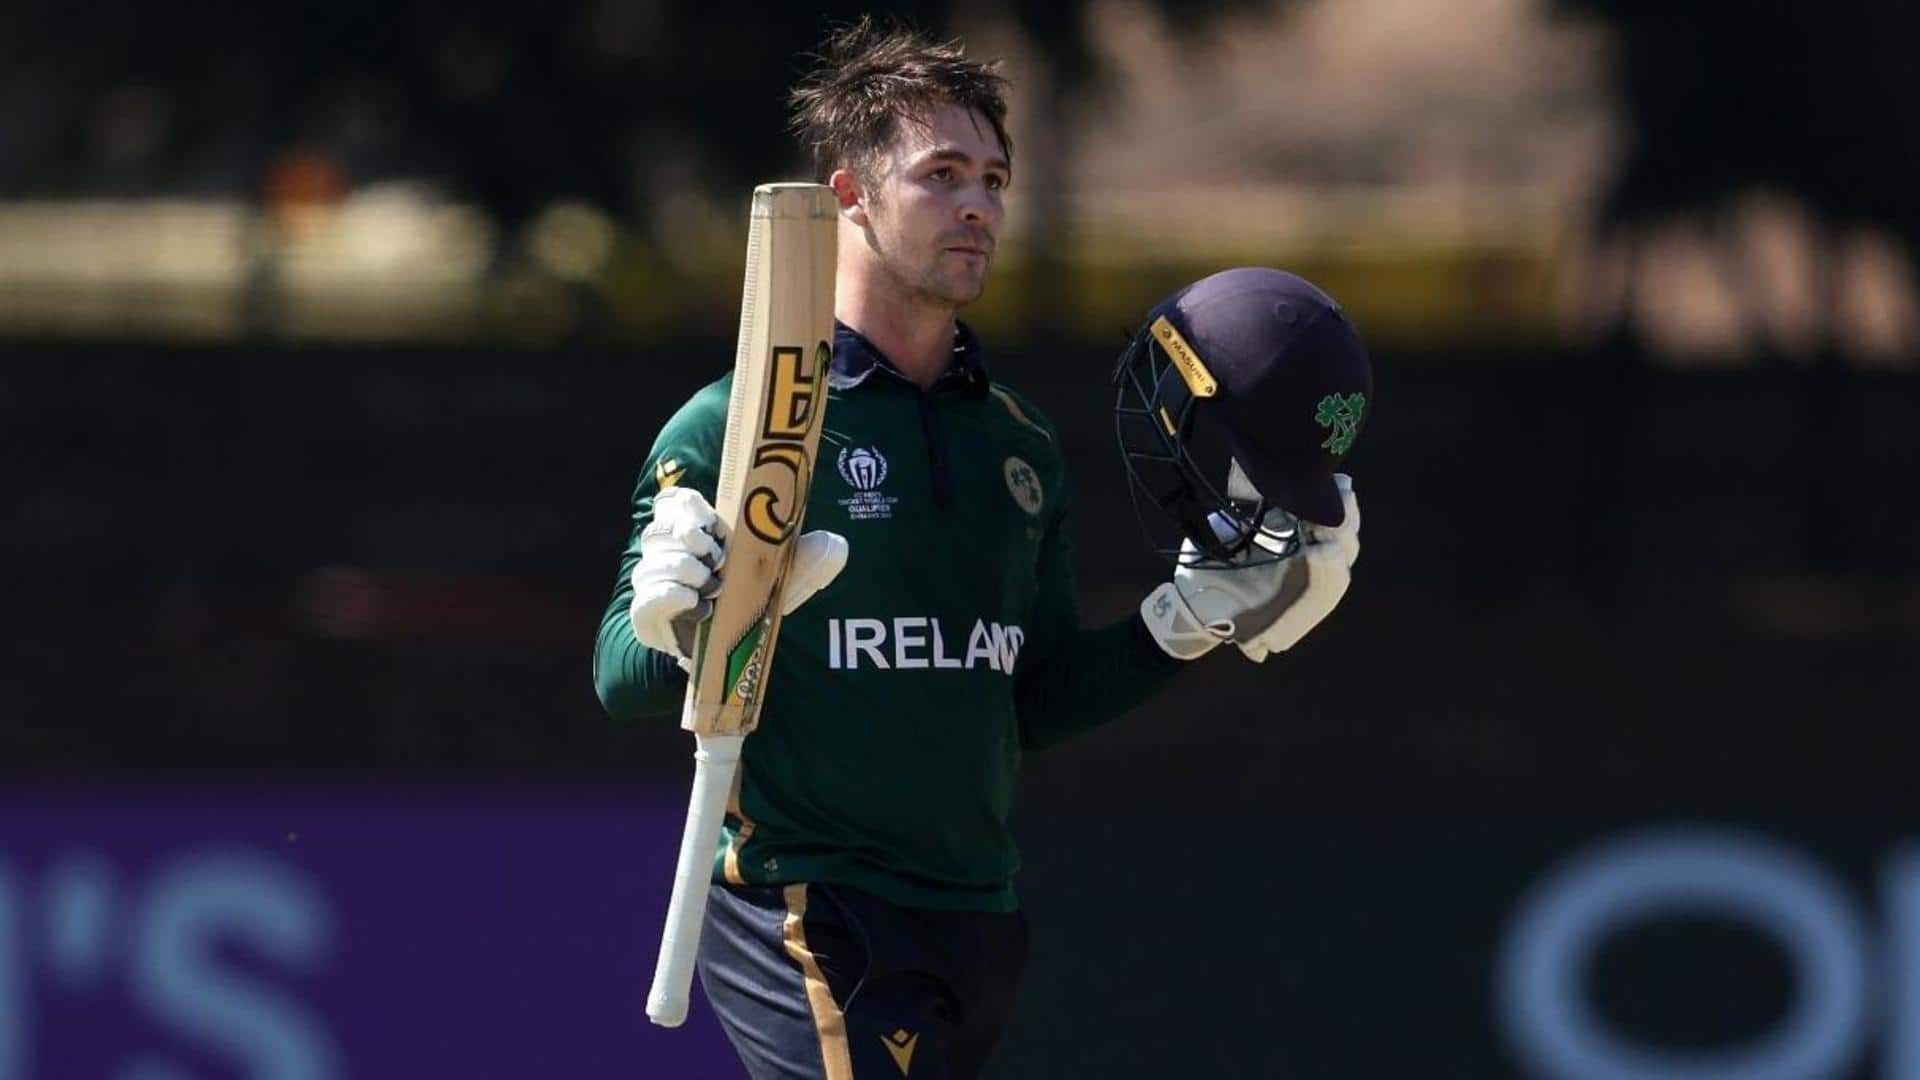 CWC Qualifiers: Ireland's Curtis Campher slams his maiden ODI century